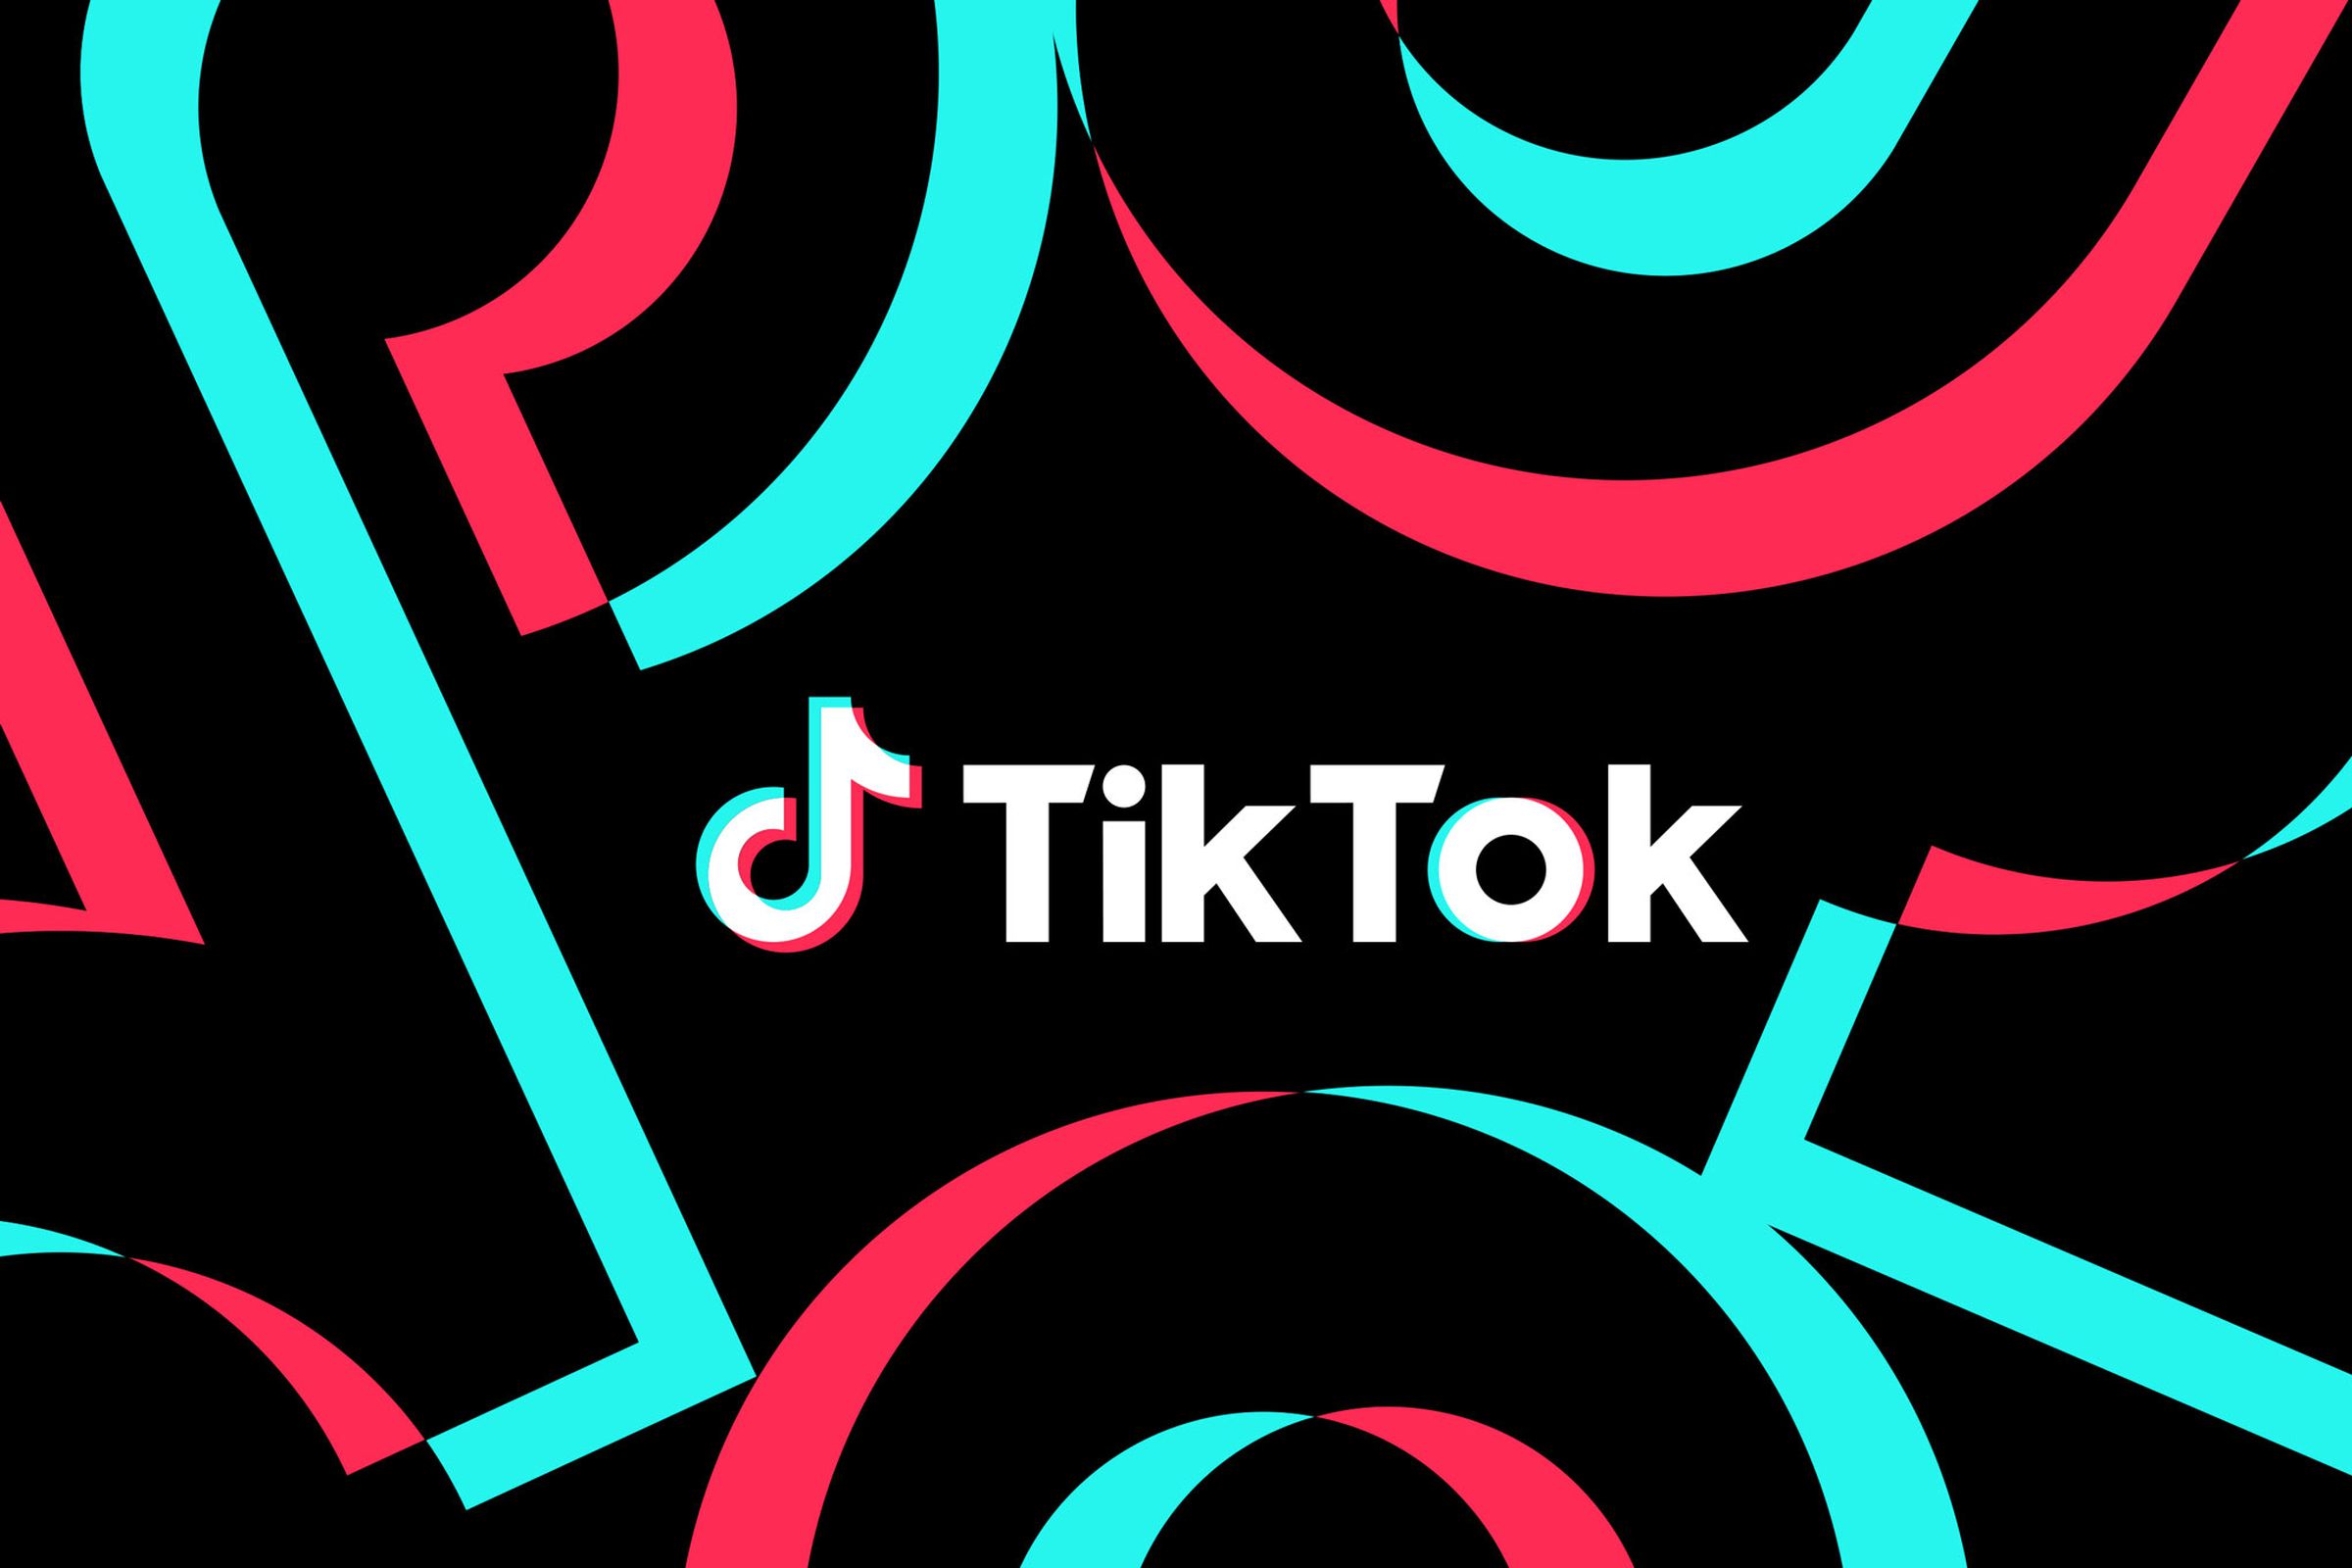 The TikTok logo surrounded by red and letters from the word “TikTok”